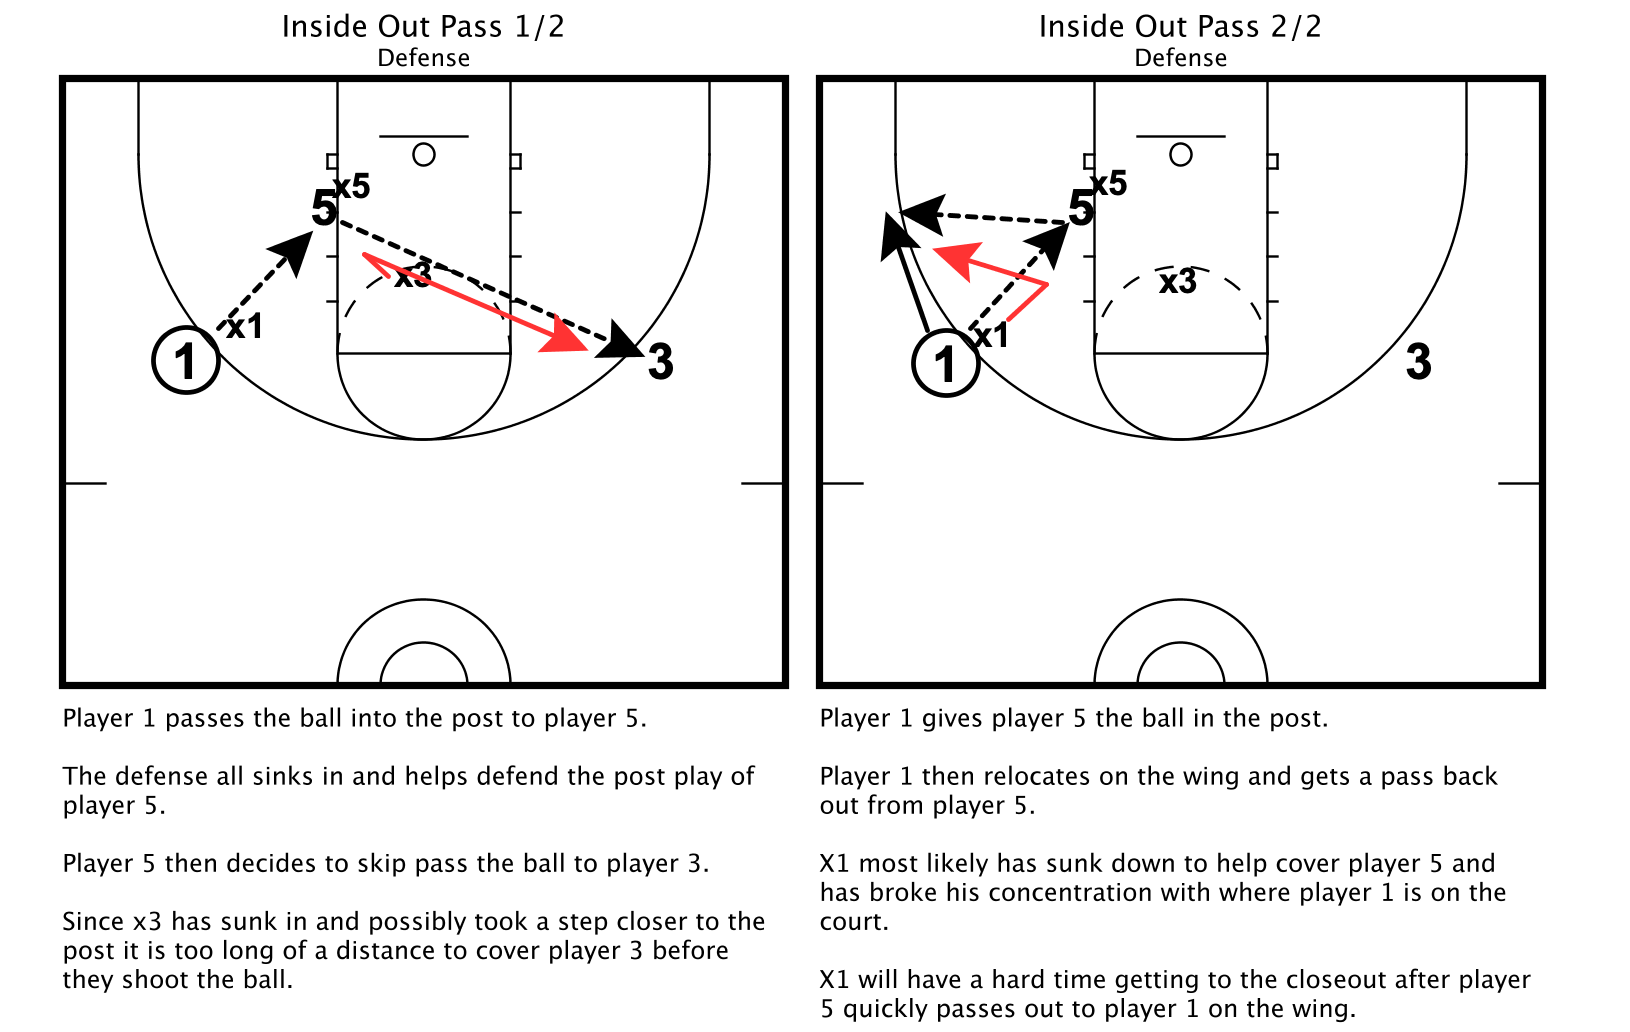 Inside Out Pass